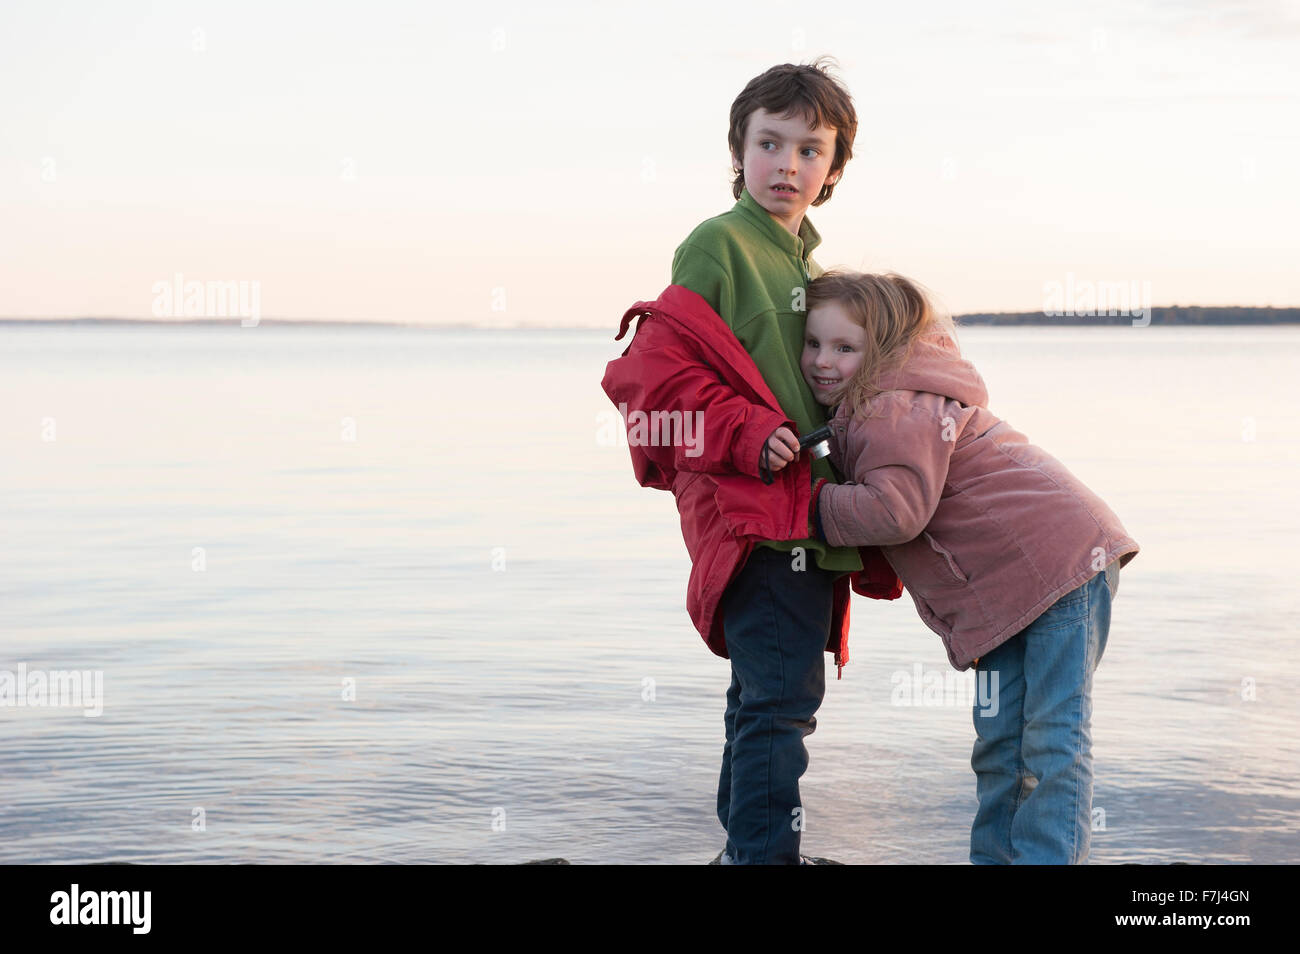 Little girl hugging her brother at water's edge Stock Photo